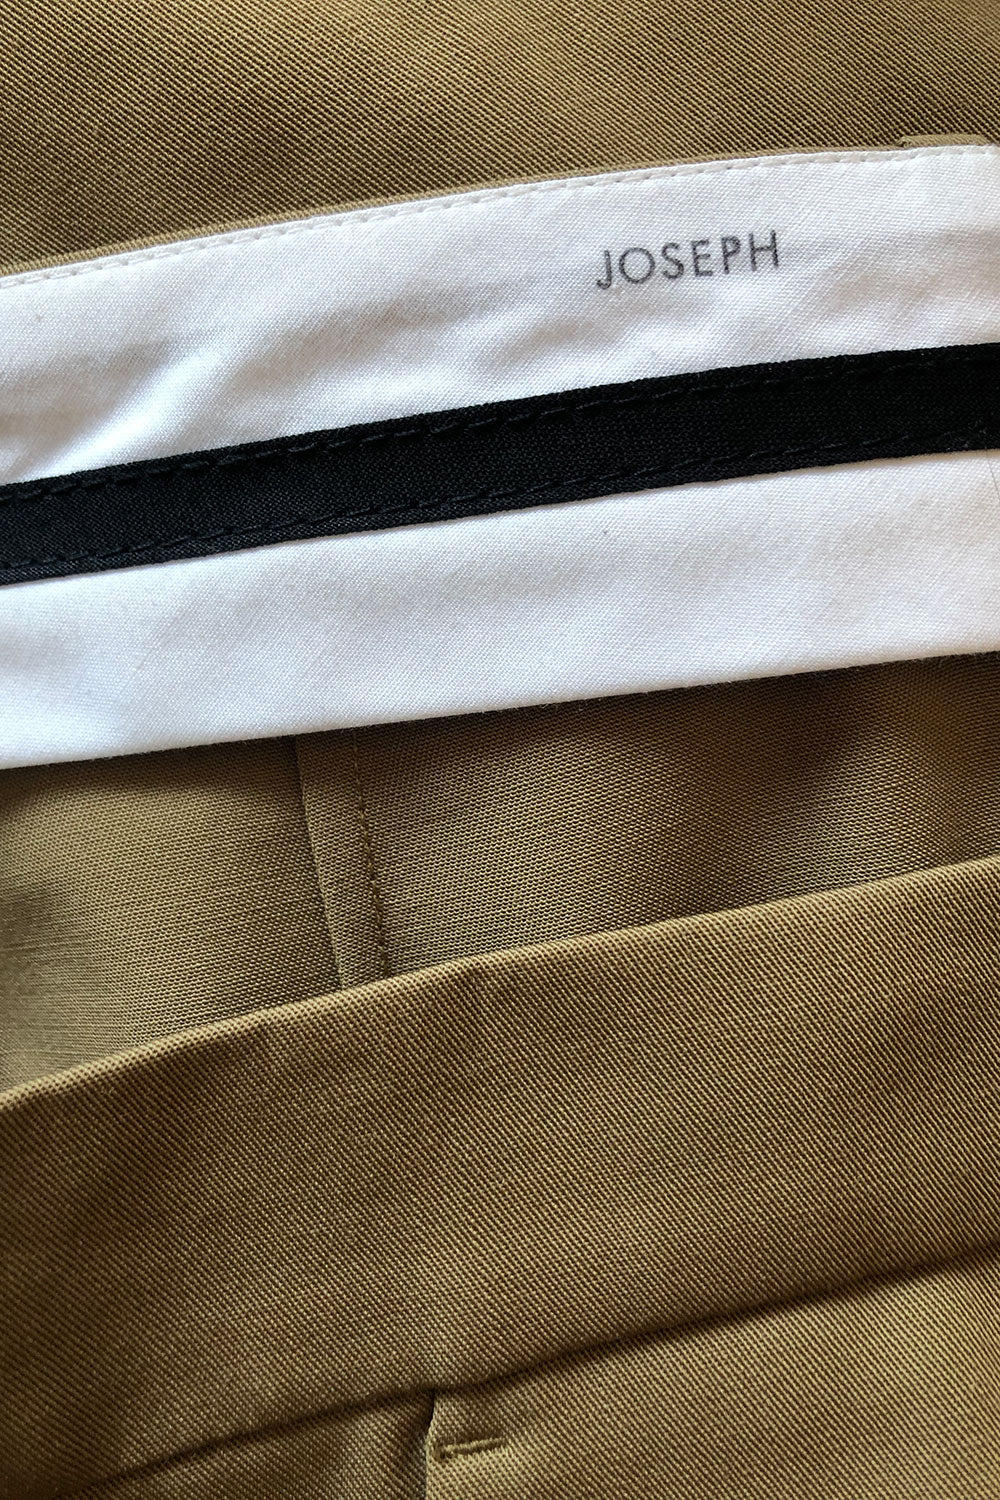 Joseph Pre-Owned Utilitarian Co-ord Suit Size 8